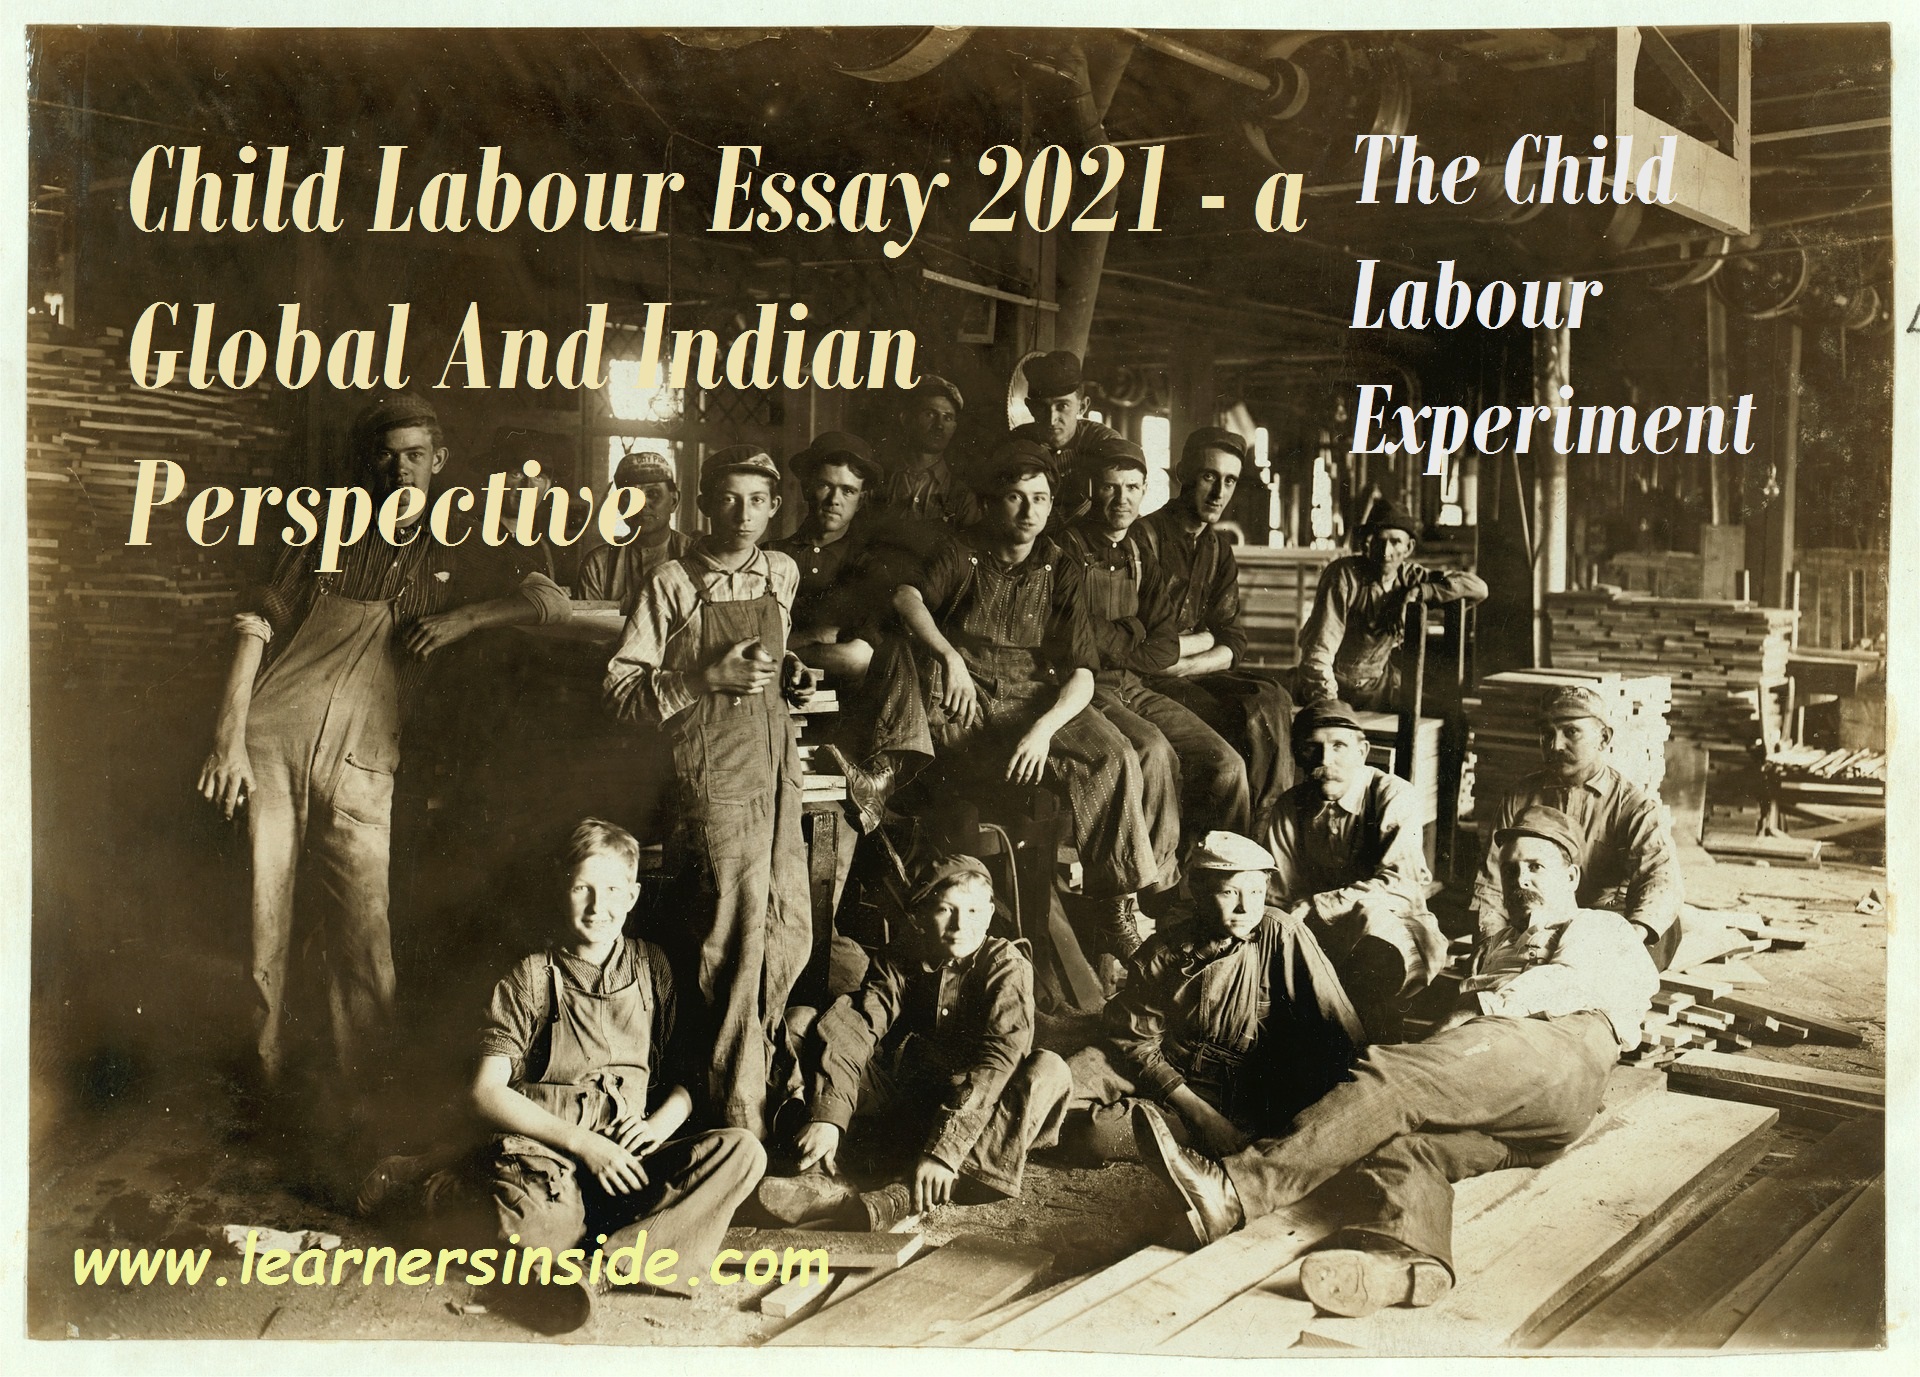 Child Labour Essay 2021 – a Global And Indian Perspective